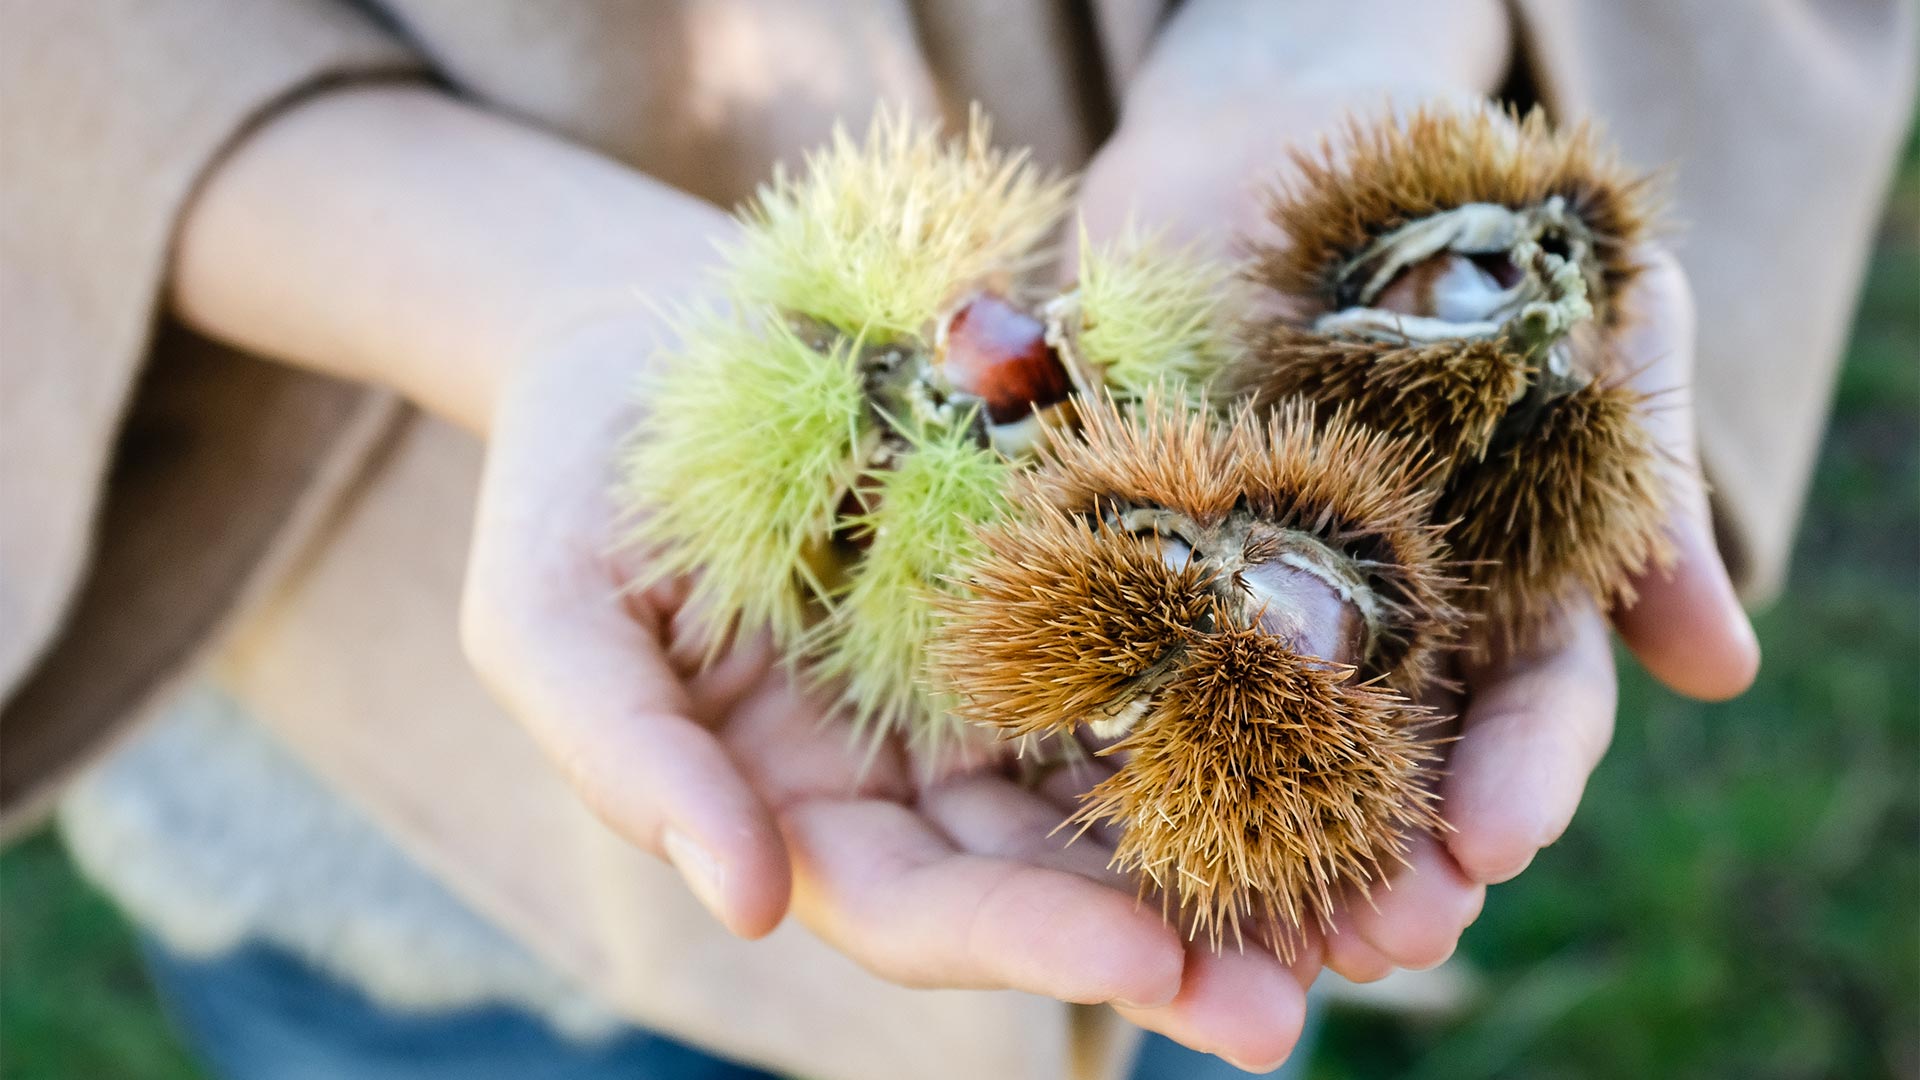 A farmer's hands hold a handful of freshly harvested chestnuts, ready to be cooked.